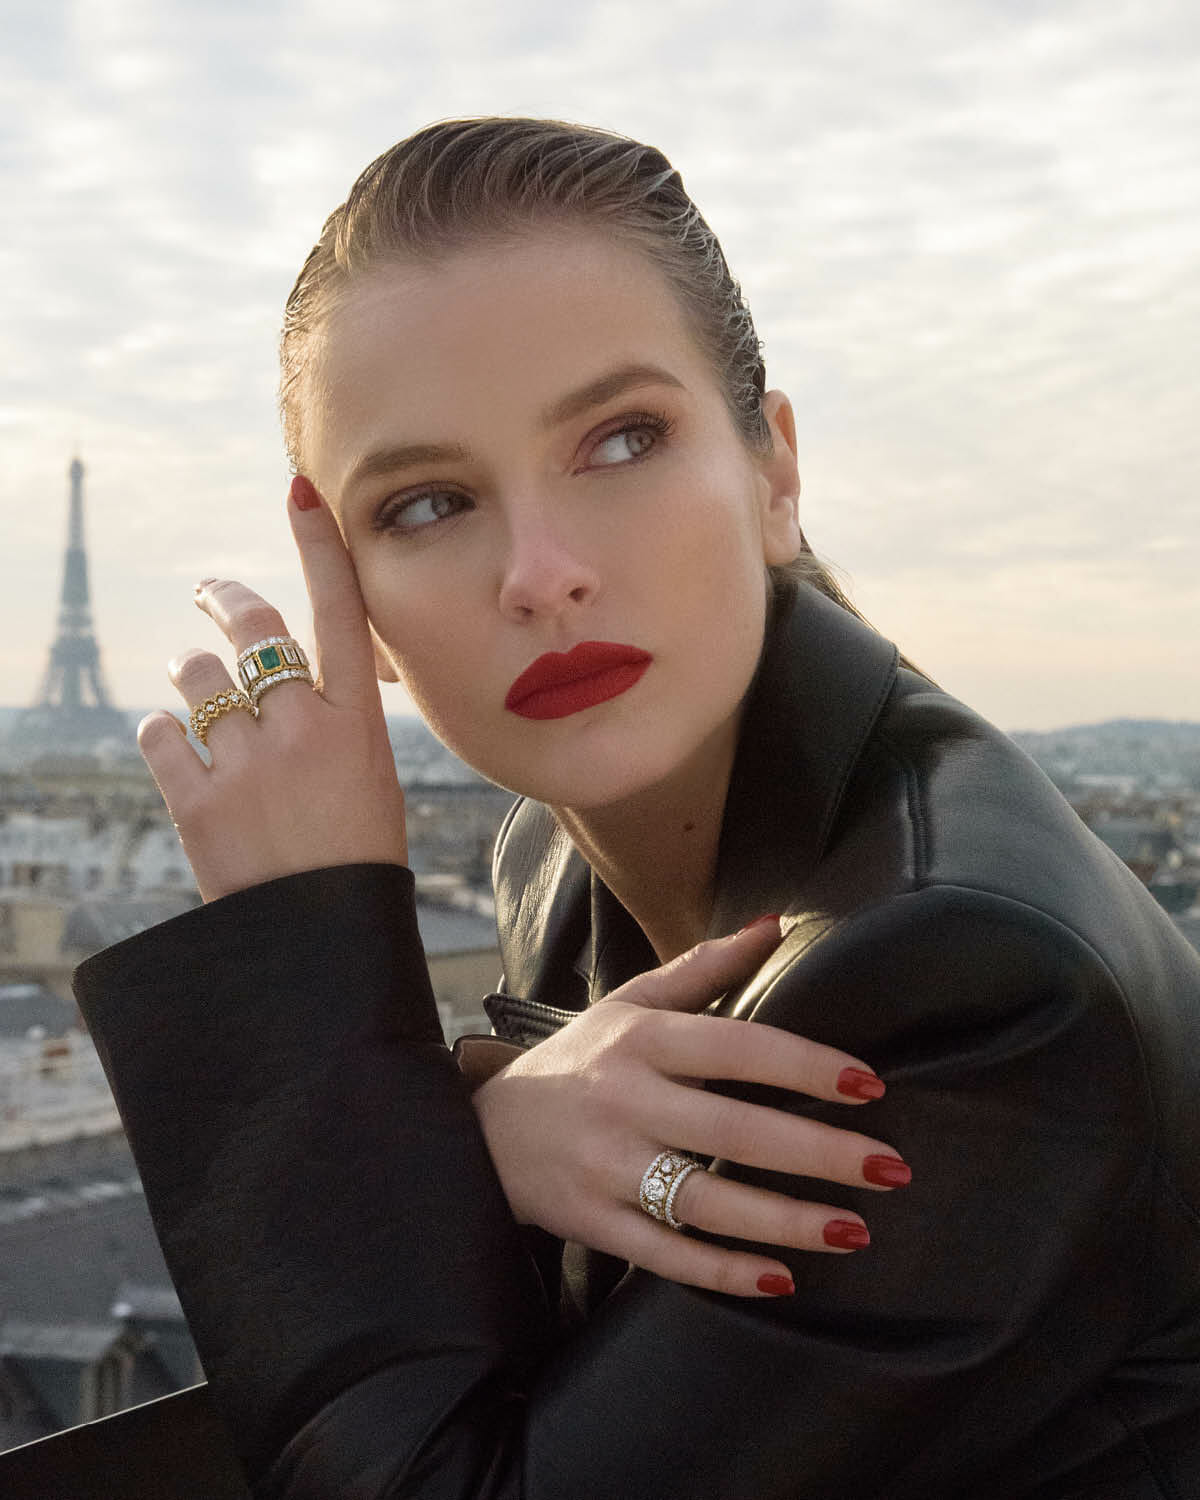 Camille From Emily In Paris Is A Real-Life Model